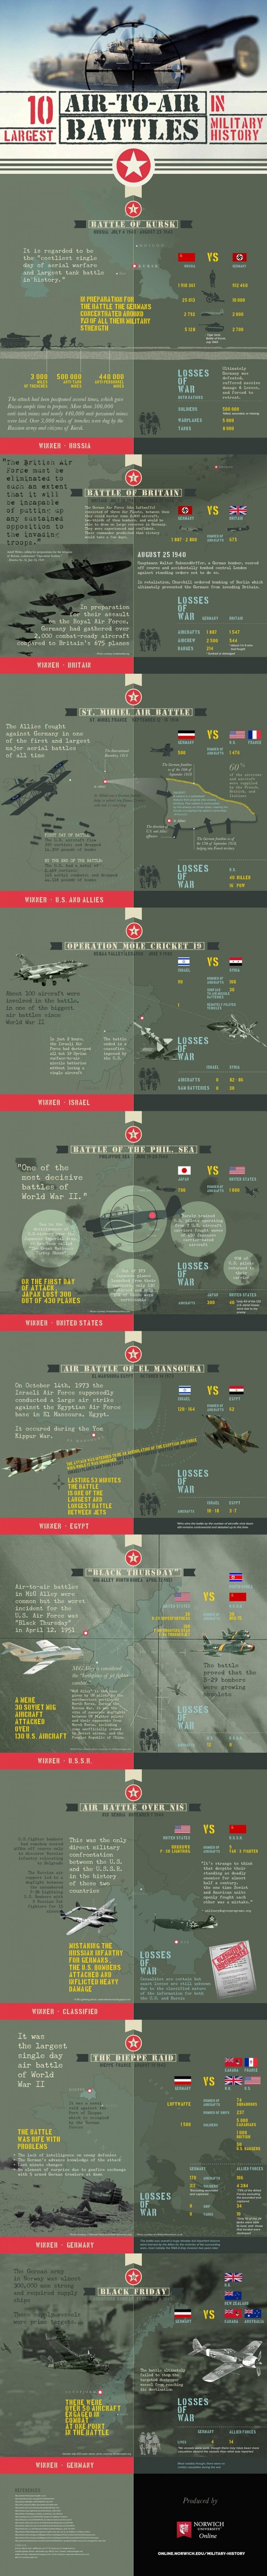 infographic - 10 largest air to air battles